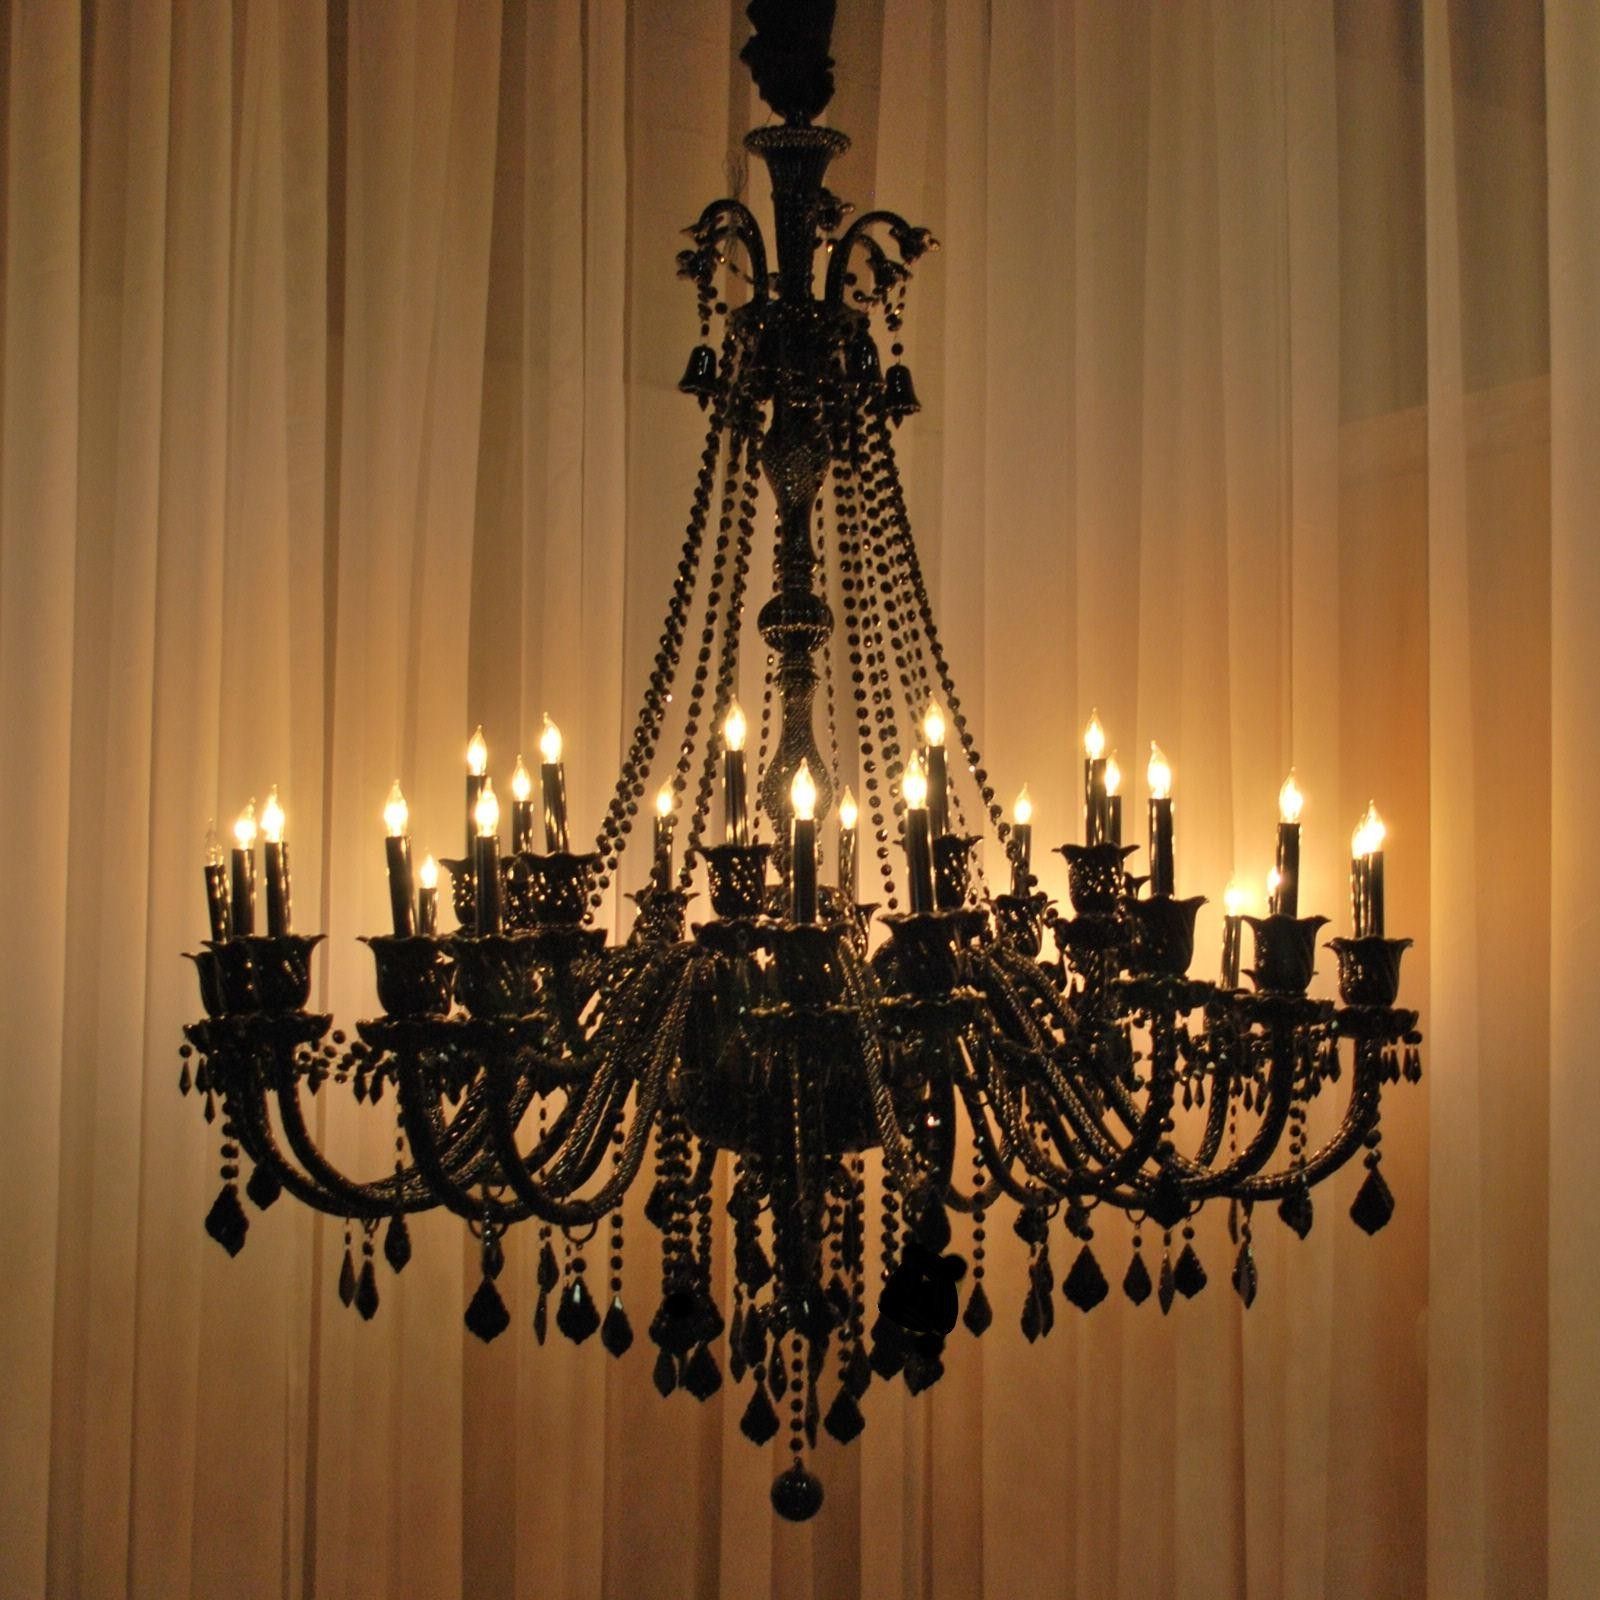 Big Modern Chandeliers Types And Location Lamp World For Big Chandeliers (View 13 of 15)